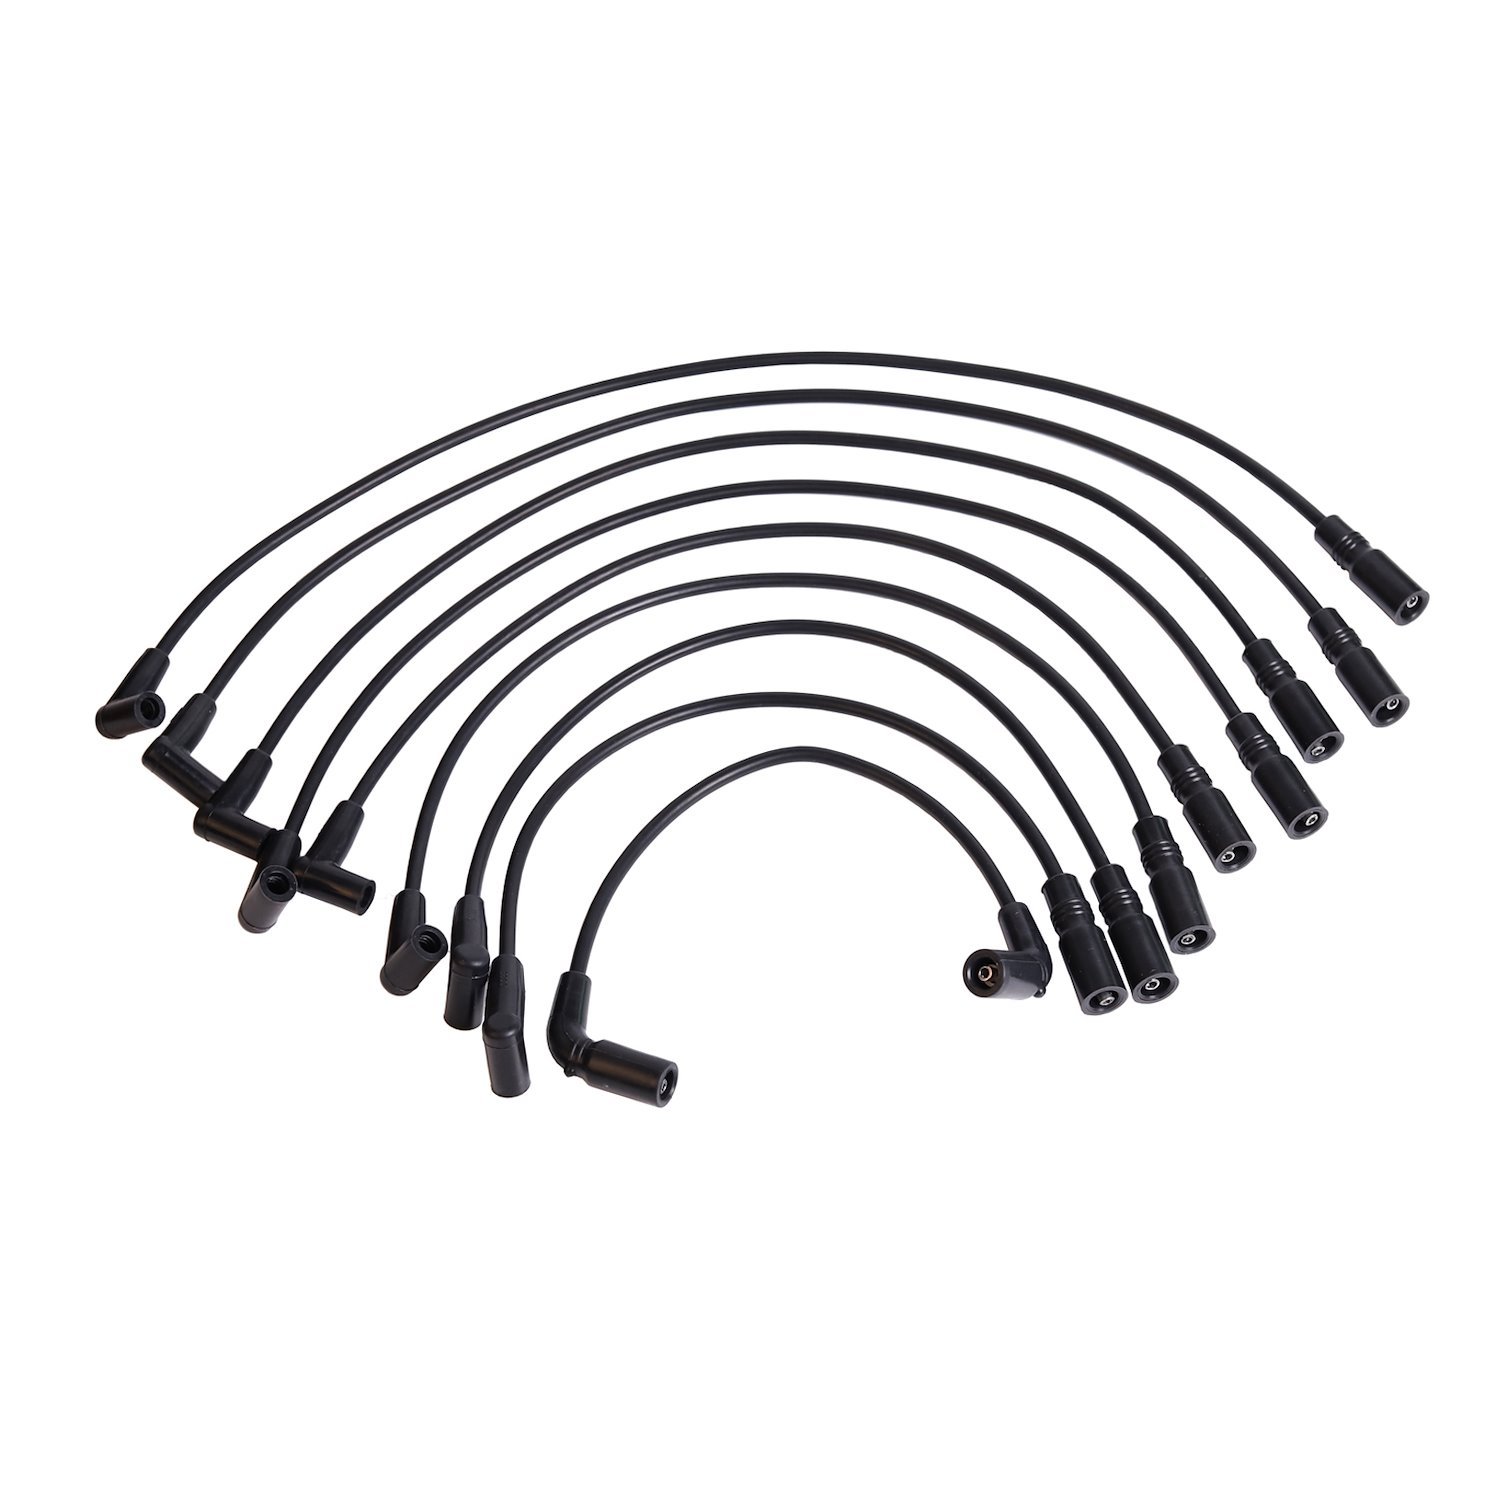 OE Replacement Spark Plug Wire Set for 1996-2000